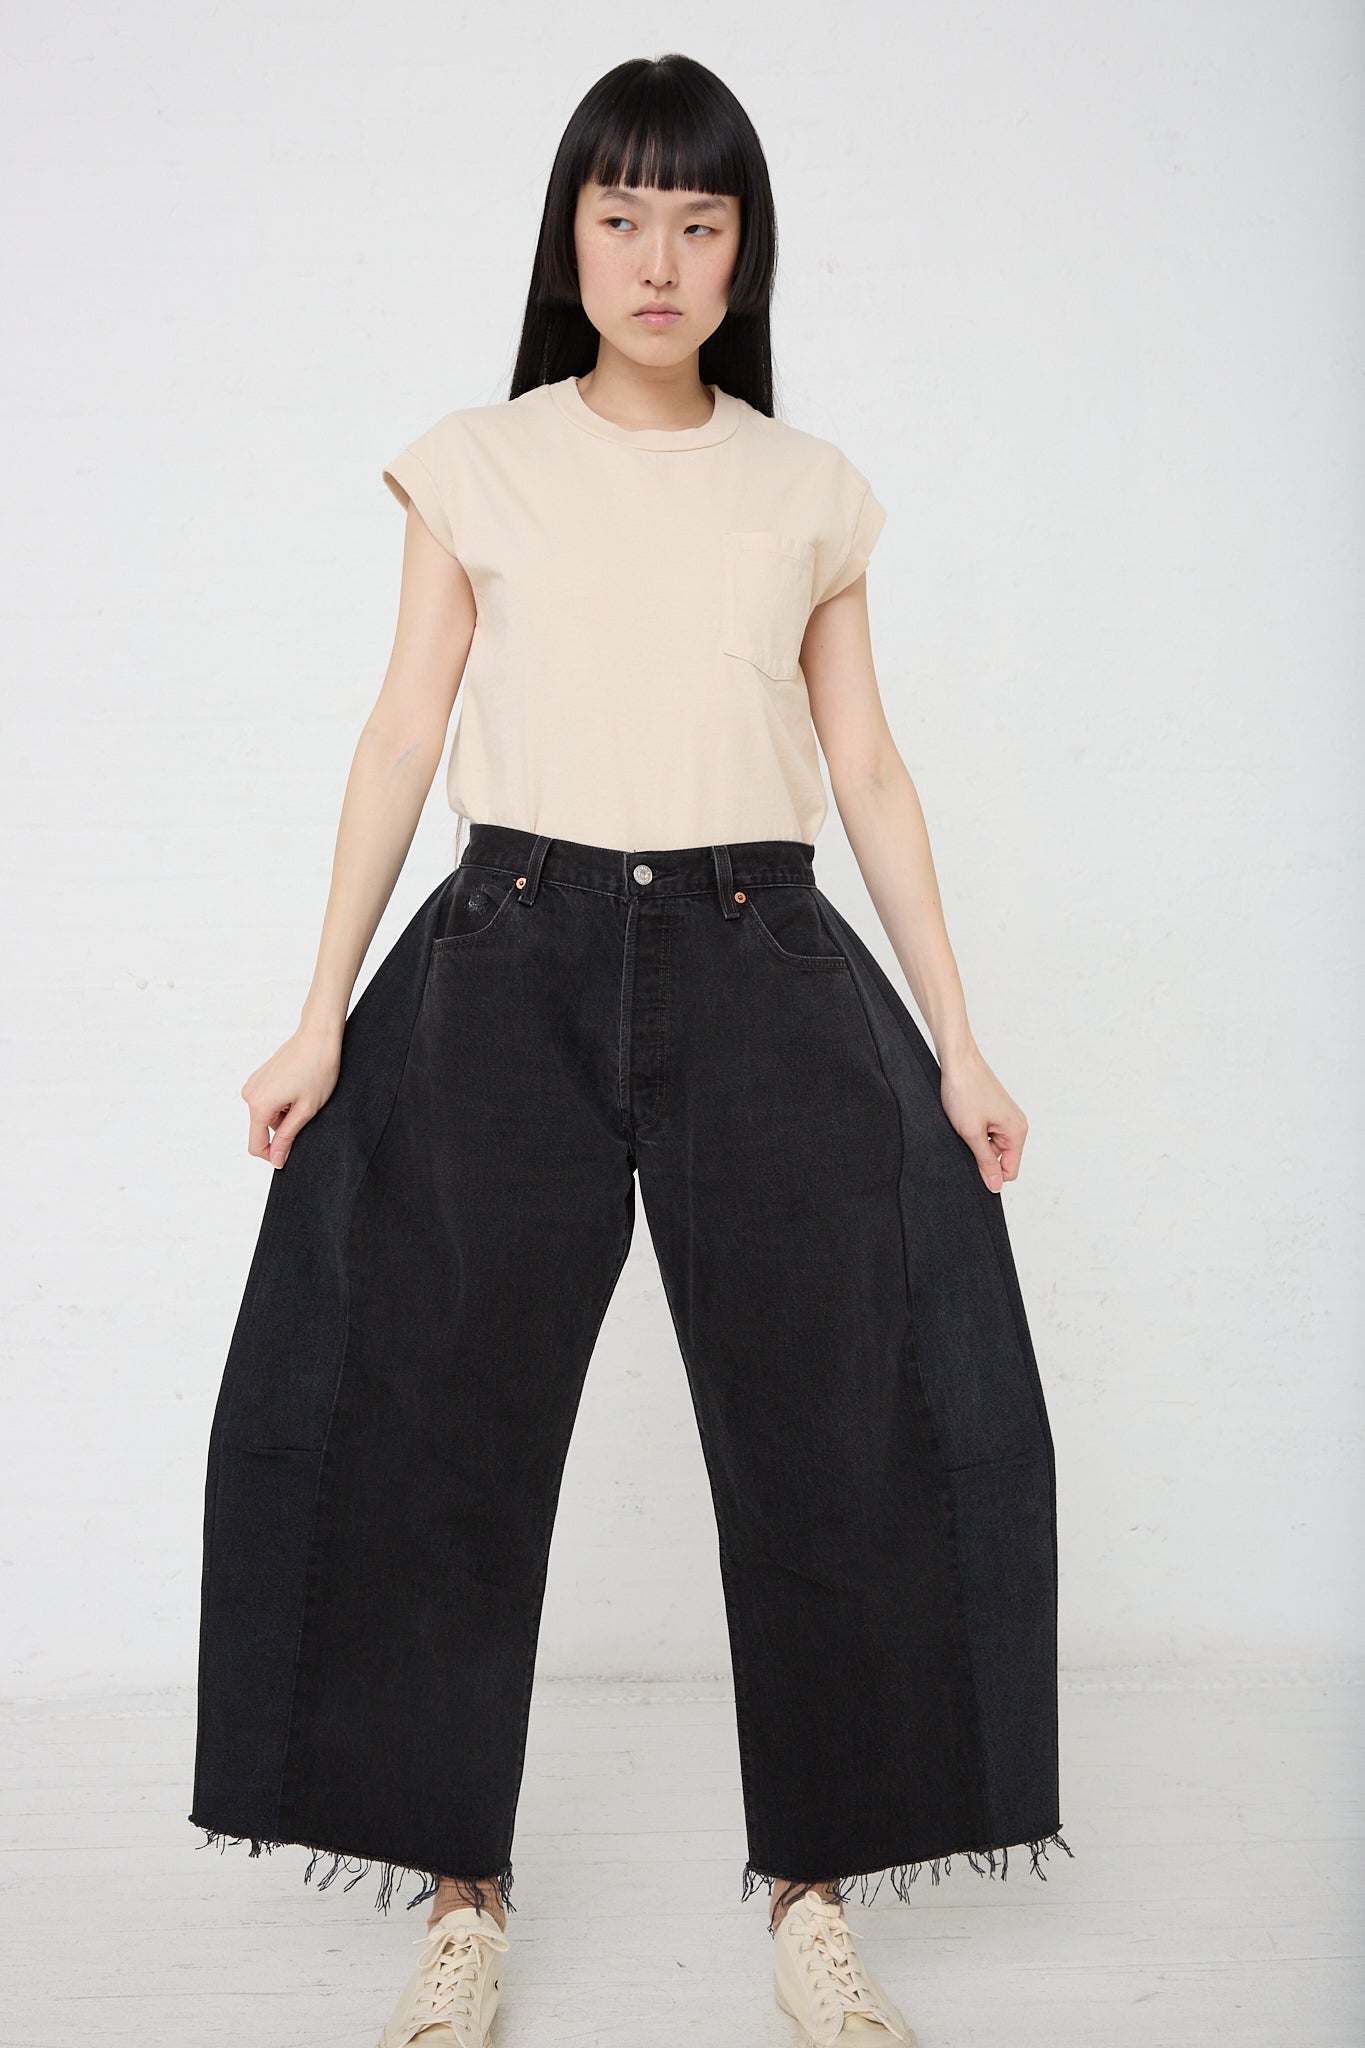 A woman showcasing a pair of B Sides vintage black denim wide leg pants in Lasso with a slouchy fit and a cutoff frayed hem.